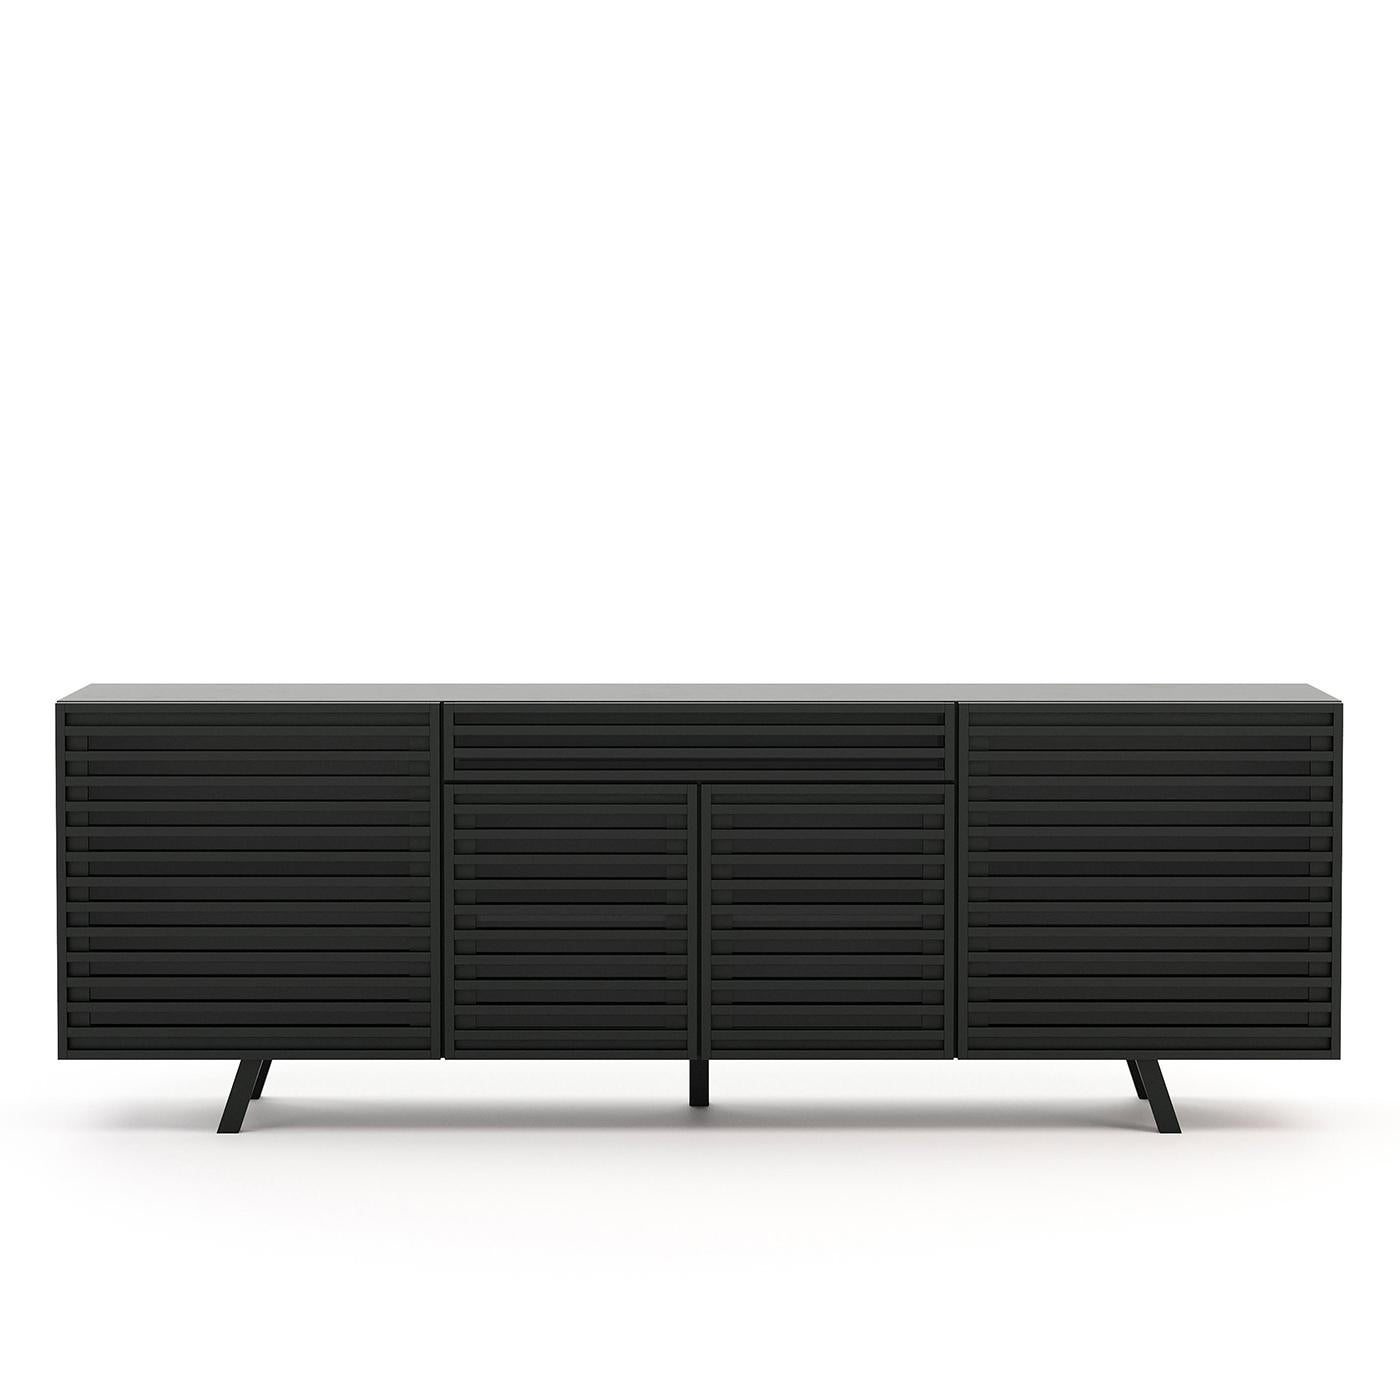 Sideboard blind black with structure in ash wood in black matte finish, 
with 4 doors, 4 shelves and 1 drawer under the top. with clear glass on
Each door's back. L 250 x D 50 x H 85cm, price: 6900,00€.
Also available in L 200 x D 50 x H 85cm,